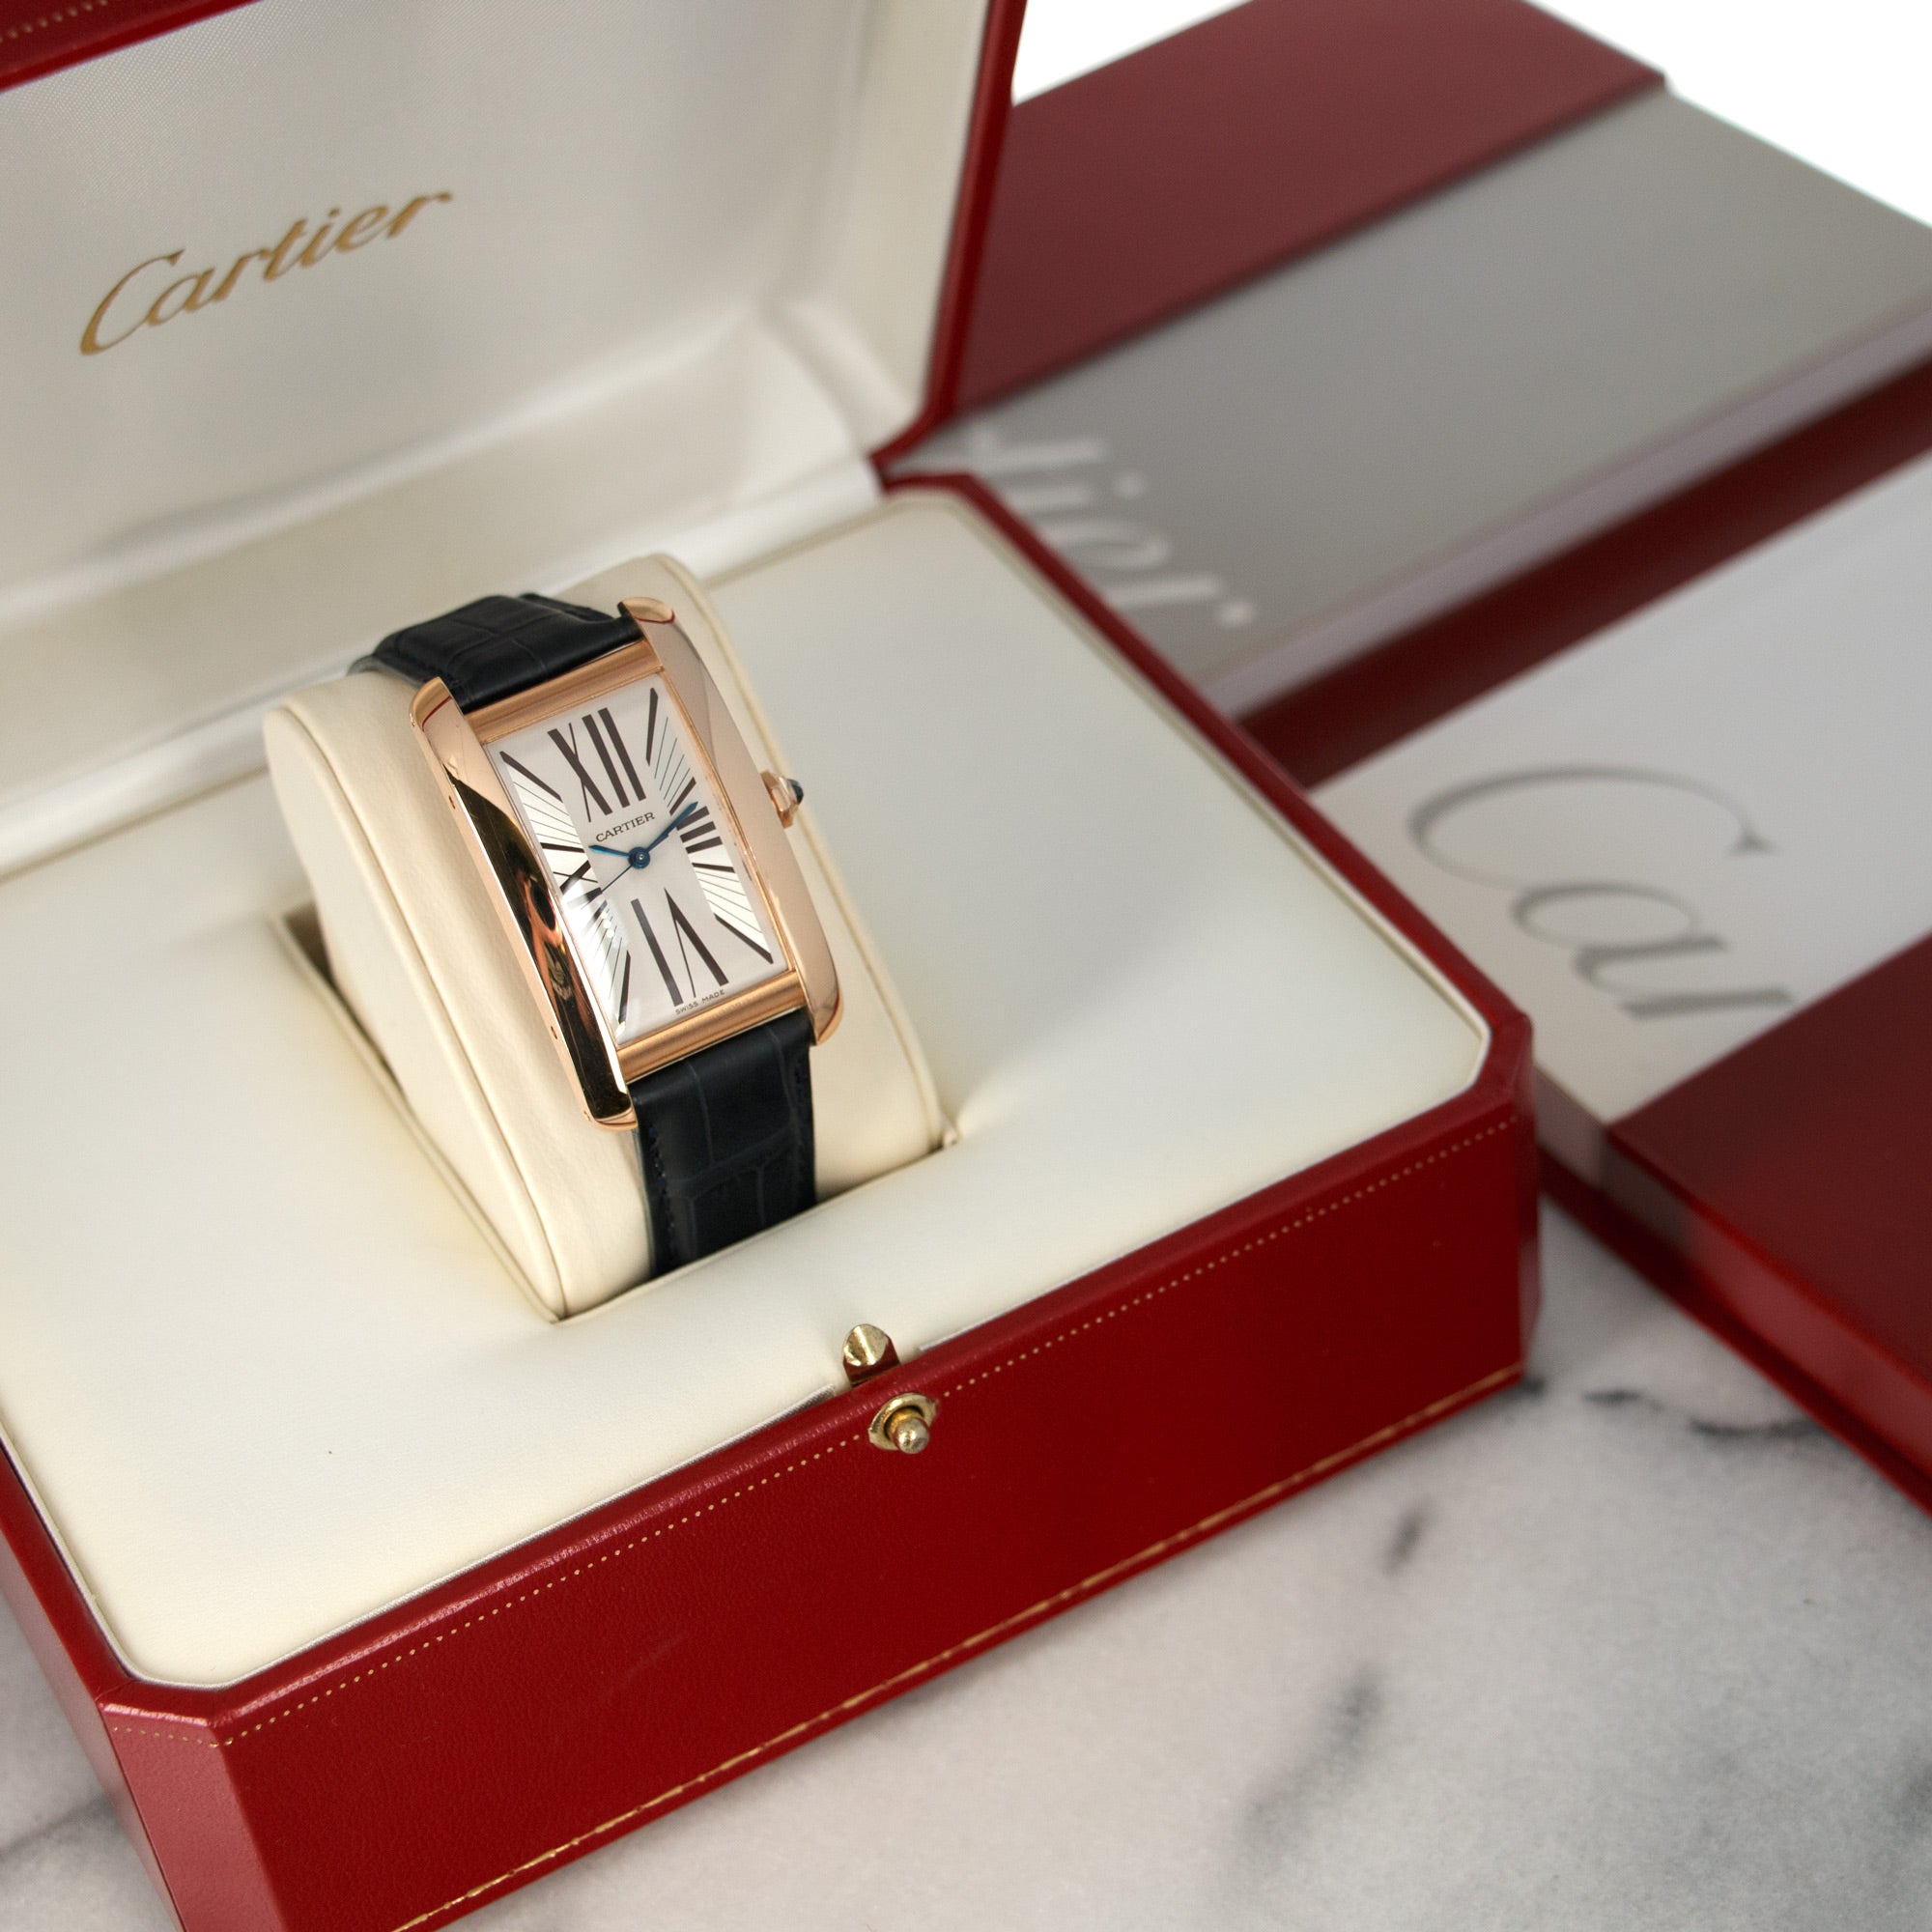 Cartier - Cartier Rose Gold Tank Americaine Watch with Original Box and Papers - The Keystone Watches